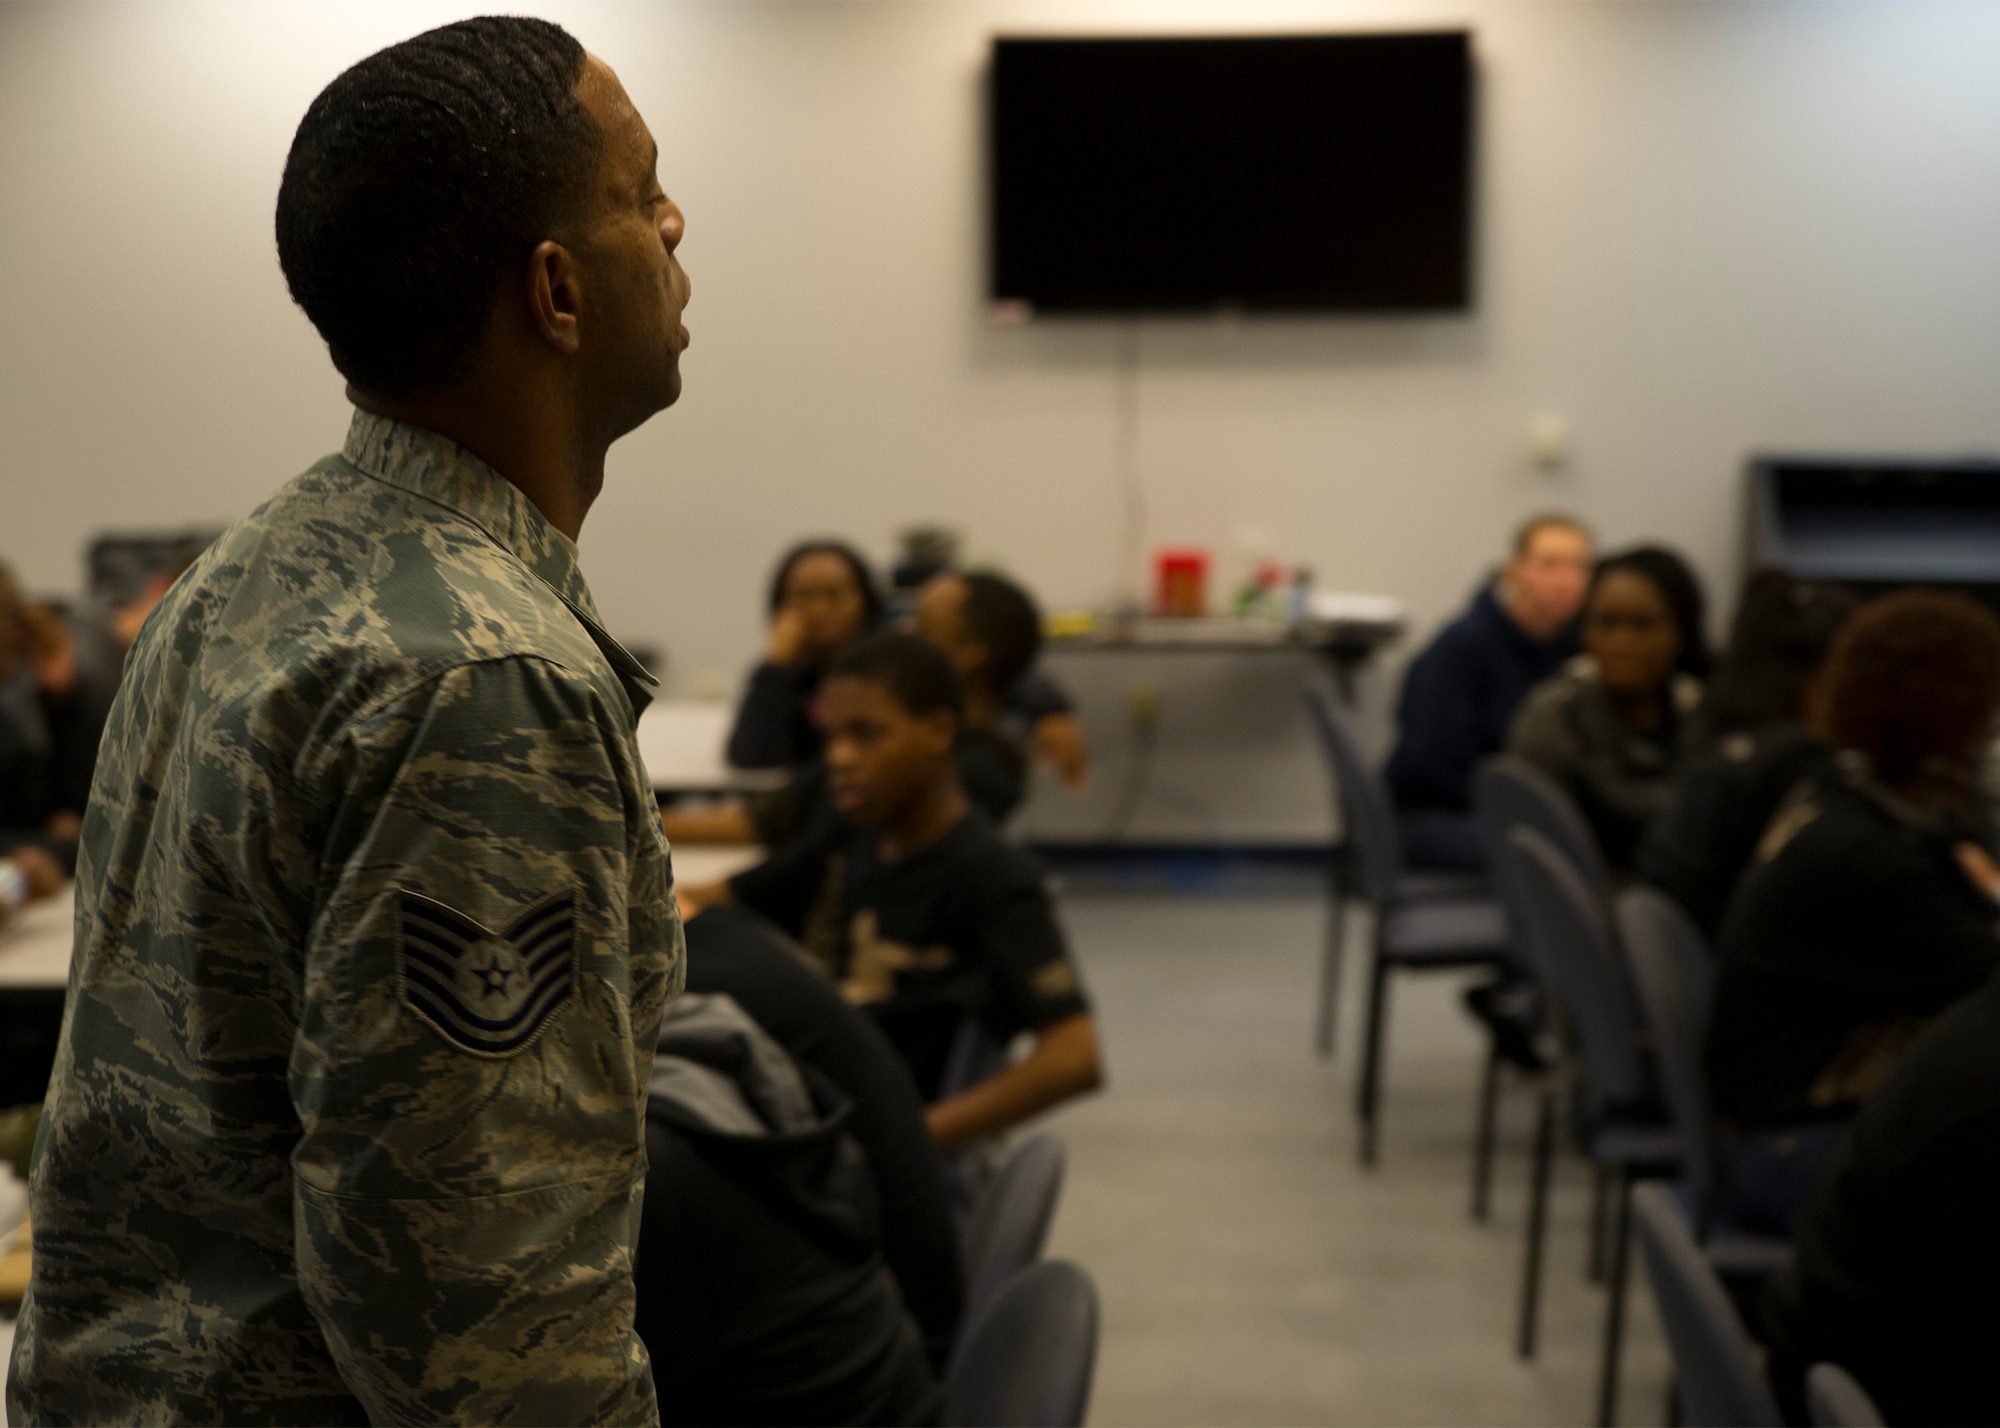 Tech. Sgt. Joshua Melton, the Development and Training Flight program coordinator for the 315th Airlift Wing at Joint Base Charleston, instructs participants of the DTF January 9, 2016 at JB Charleston. Trainees are taught the basics of Air Force protocol, marching and other skills prior to their departure for Basic Military Training.